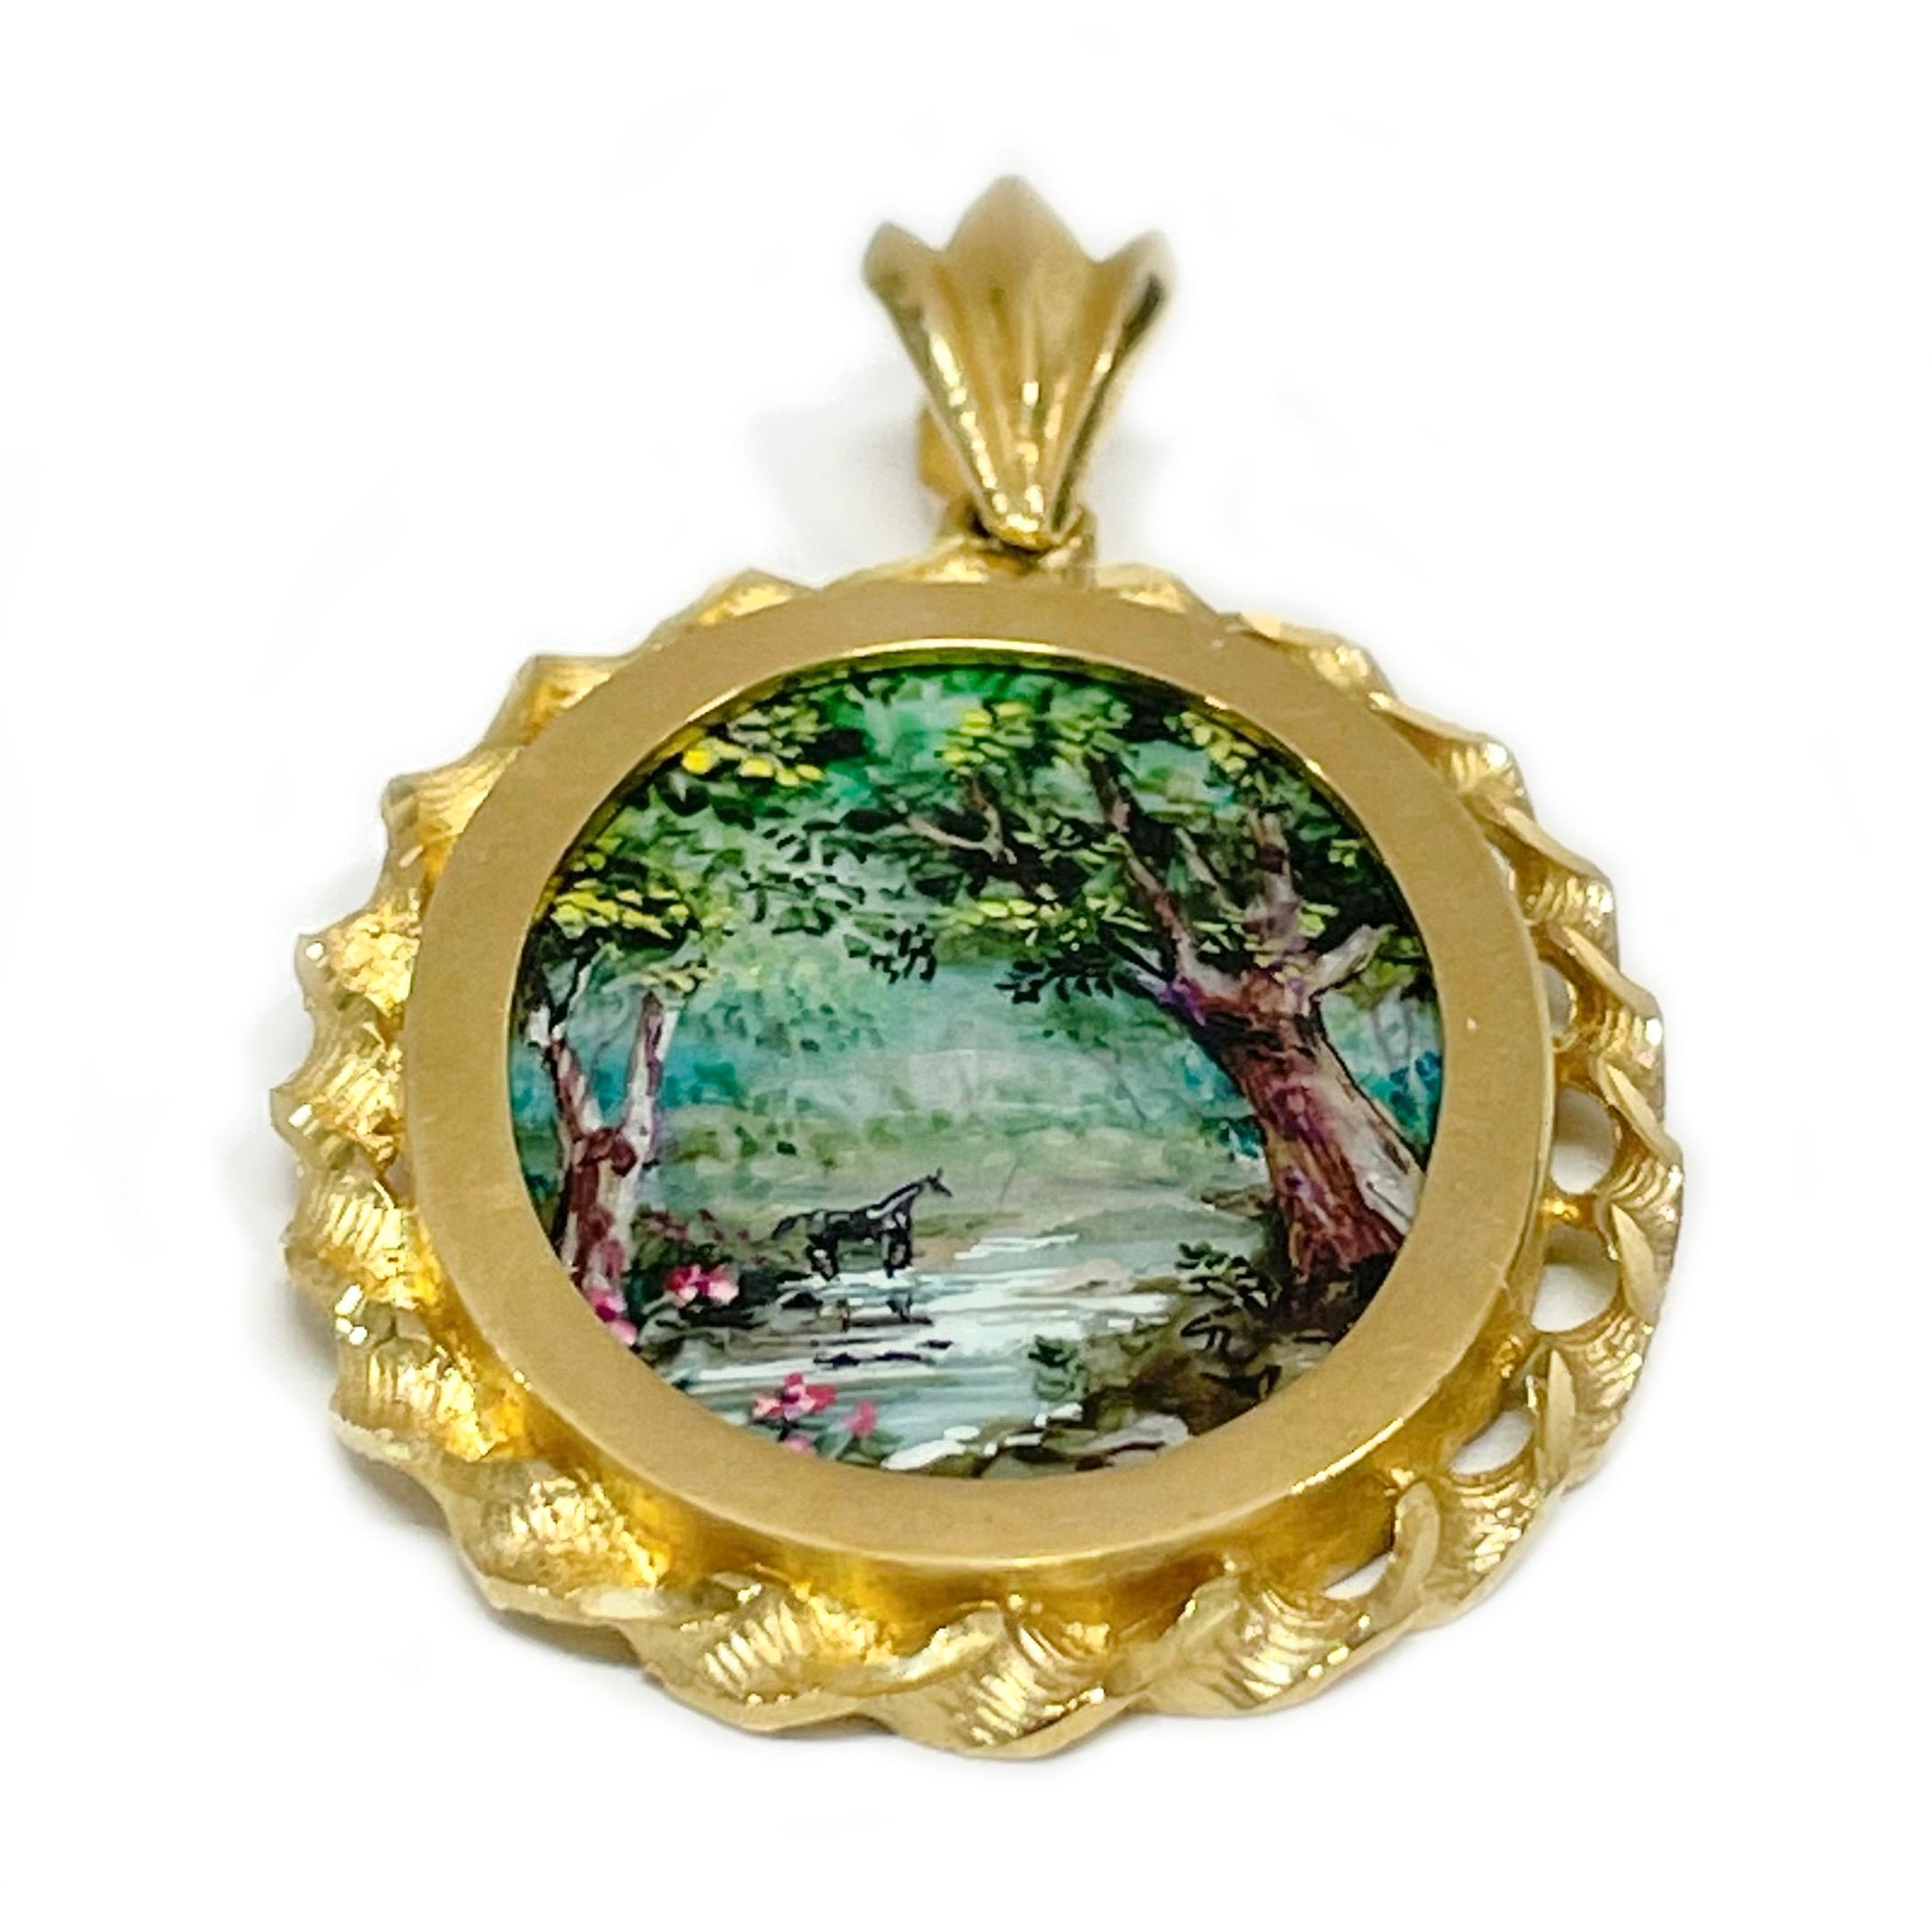 14 Karat Yellow Gold Creek with horse in the background Hand Painted on a Mother of Pearl Pendant. The miniature painting is set in a 14 karat gold twisted rope oval frame with diamond-cut details. The painting is signed by the master artist, CR